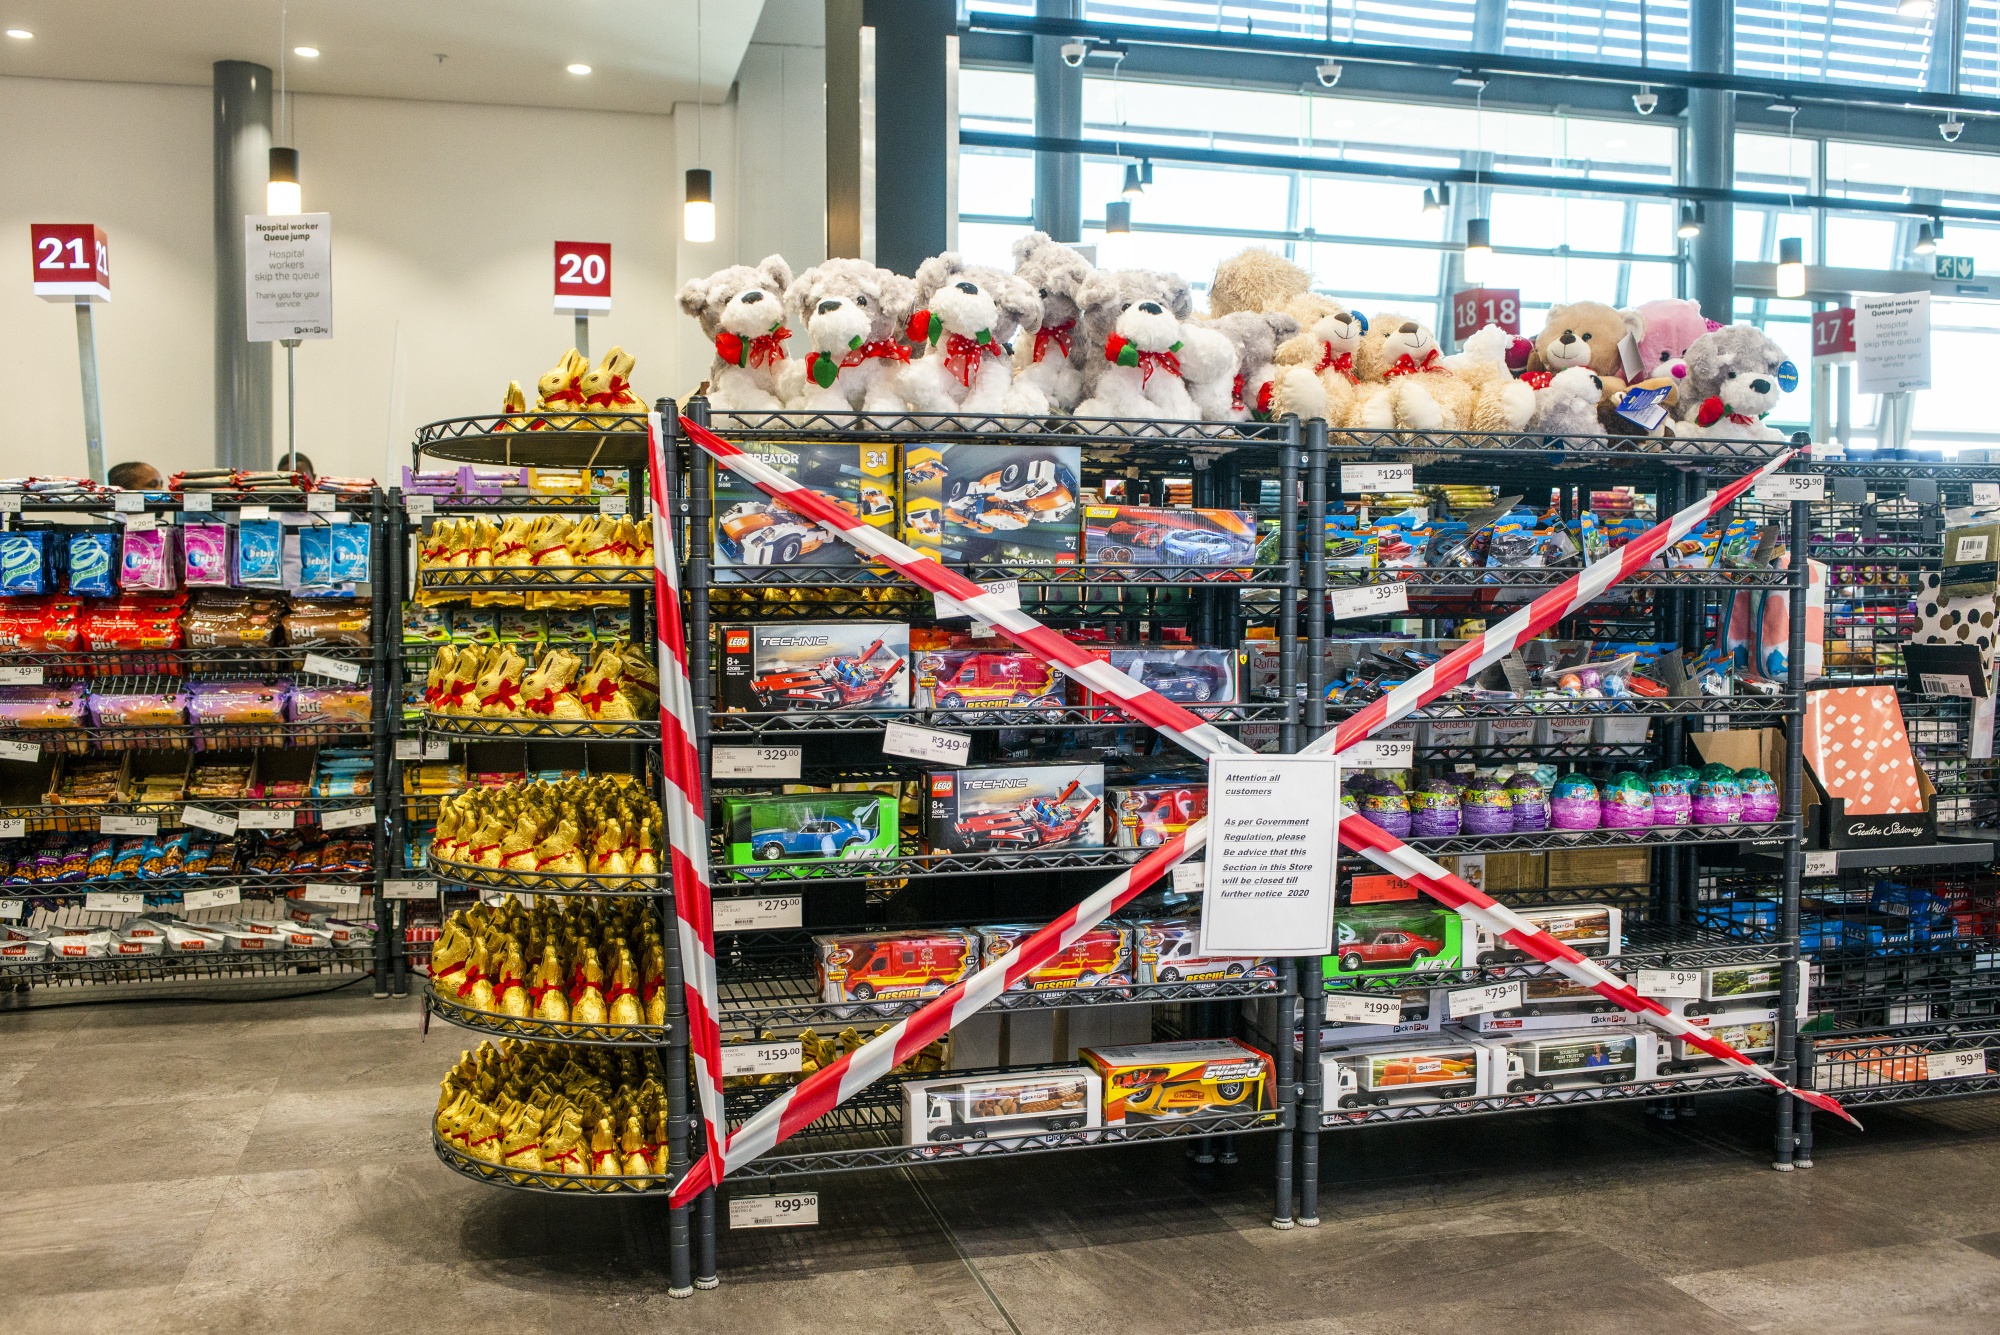 Barrier tape cordons off children's toys, banned for sale under government lockdown regulations, inside a supermarket in Johannesburg, on May 11.